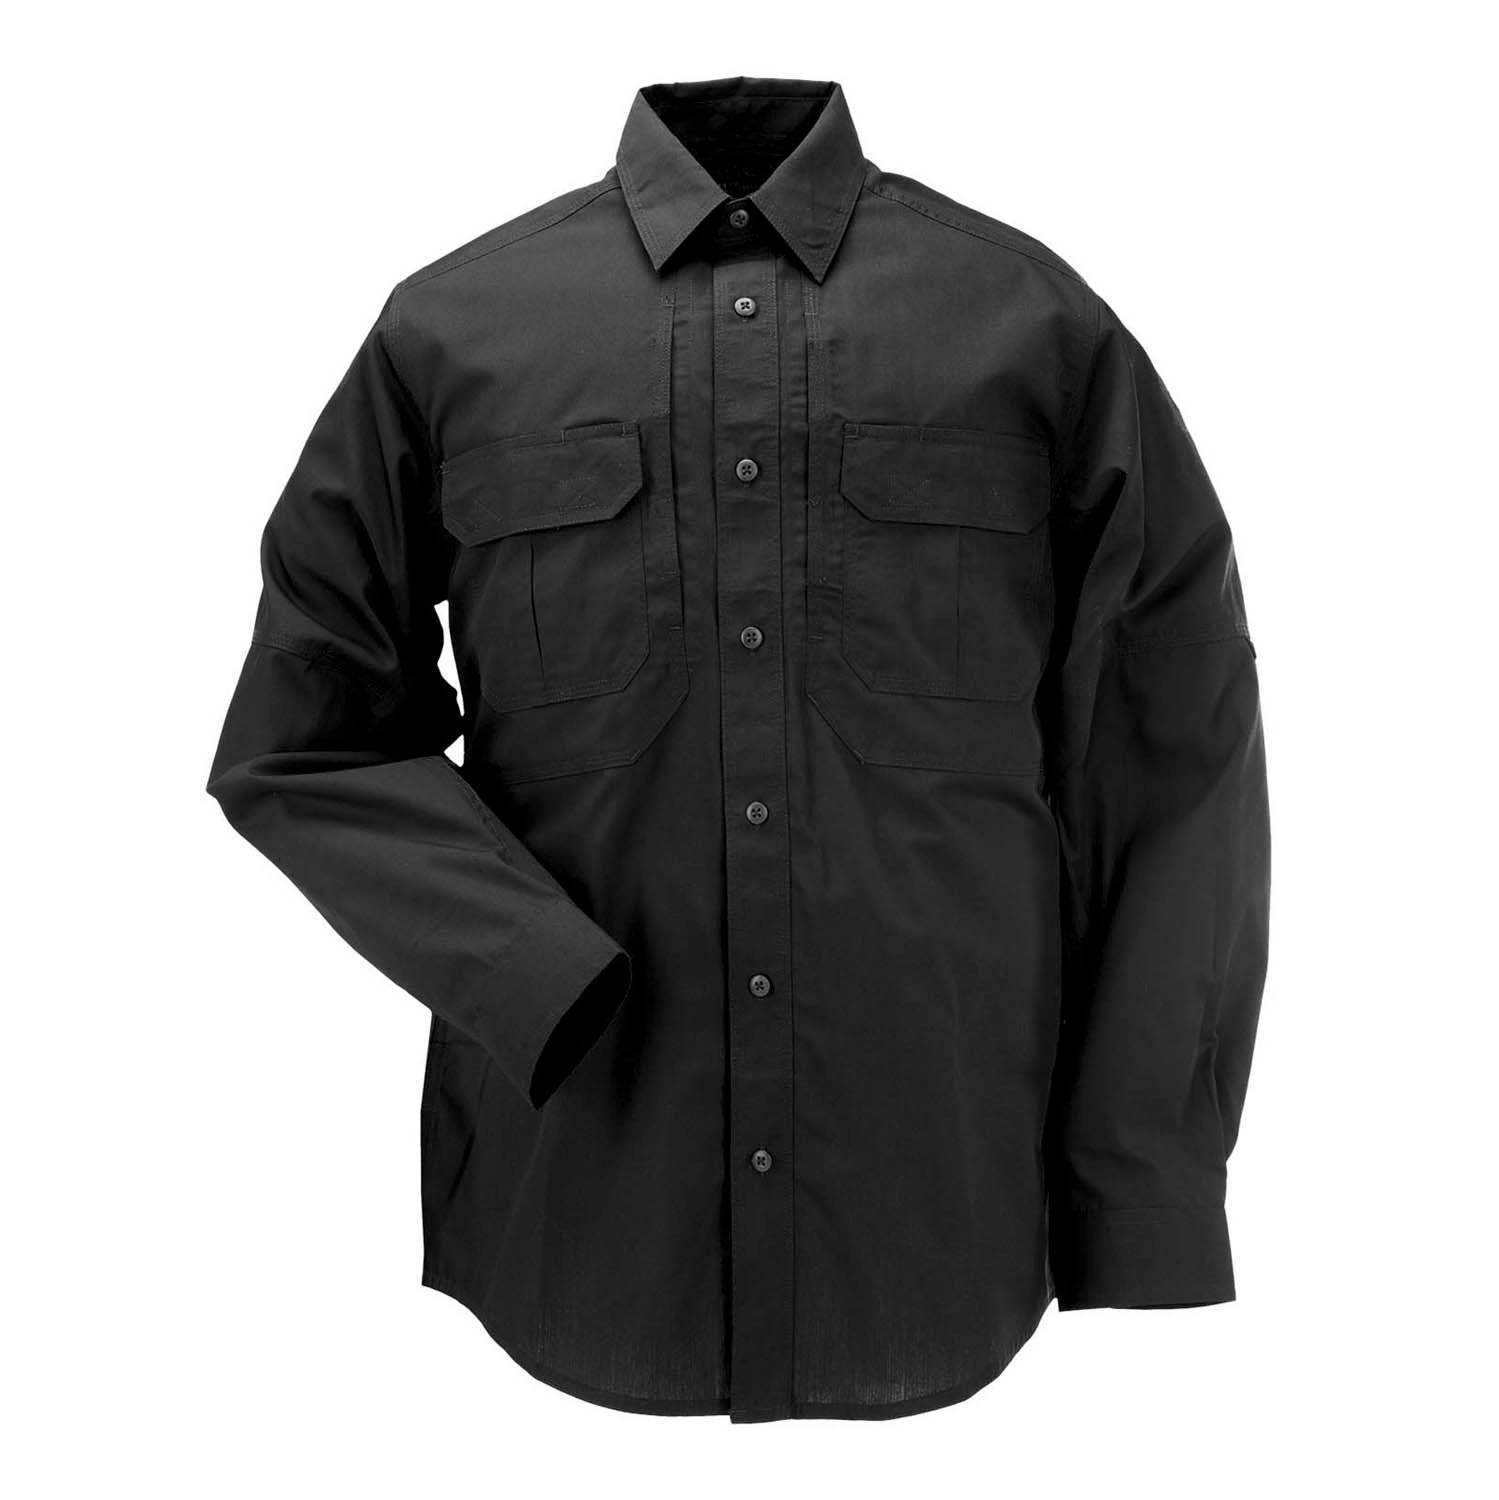 Versatile Men Tactical Shirt - Perfect for Hiking and Work